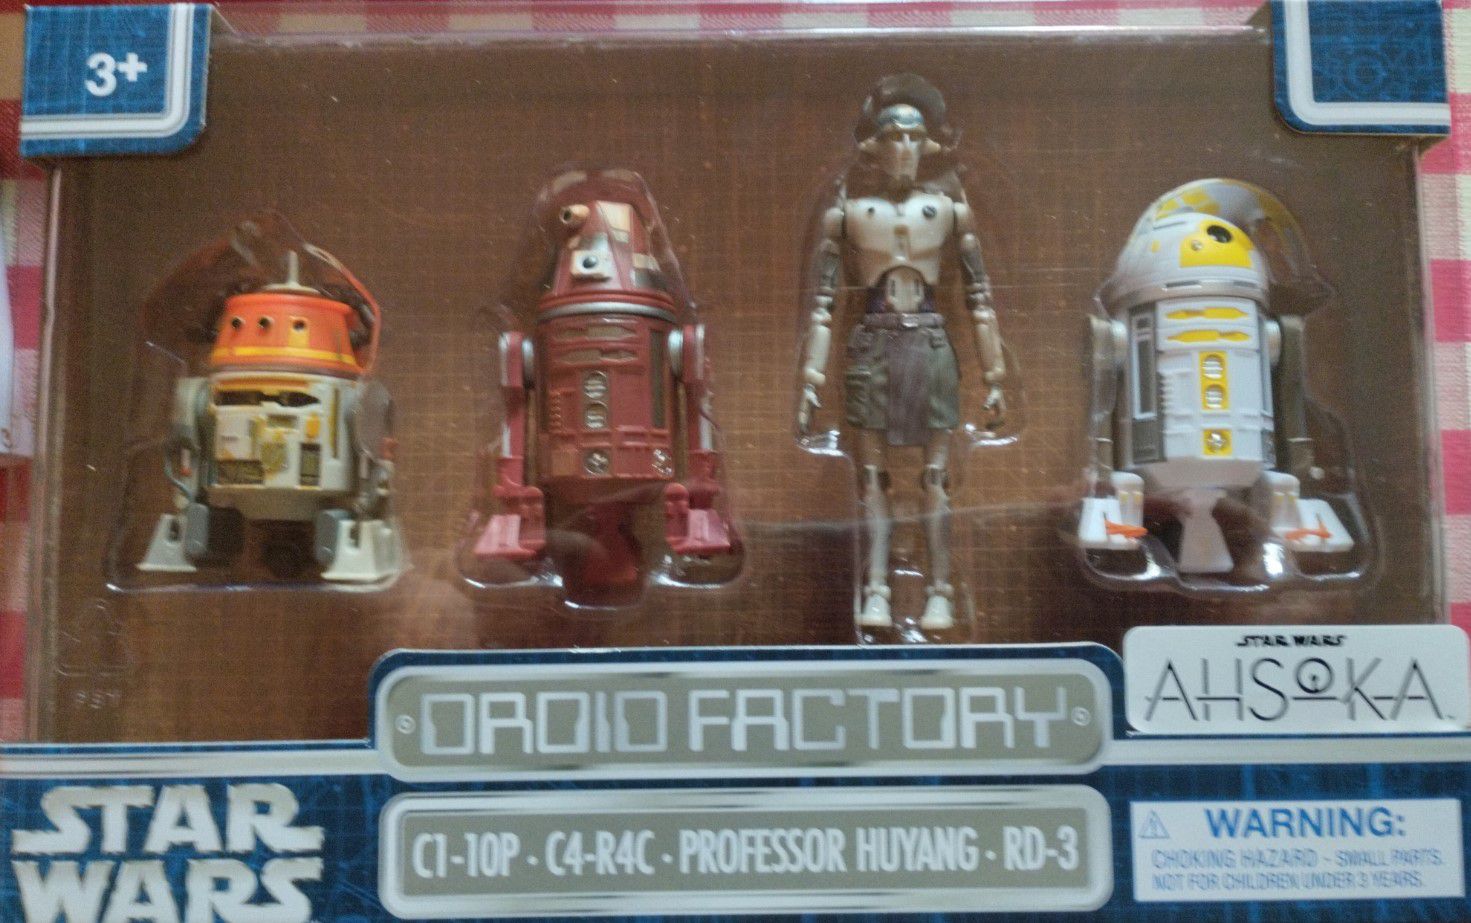 Collection n°182: janosolo kenner hasbro - Page 20 Image%2F1409024%2F20240201%2Fob_917c05_droid-factory-ashoka